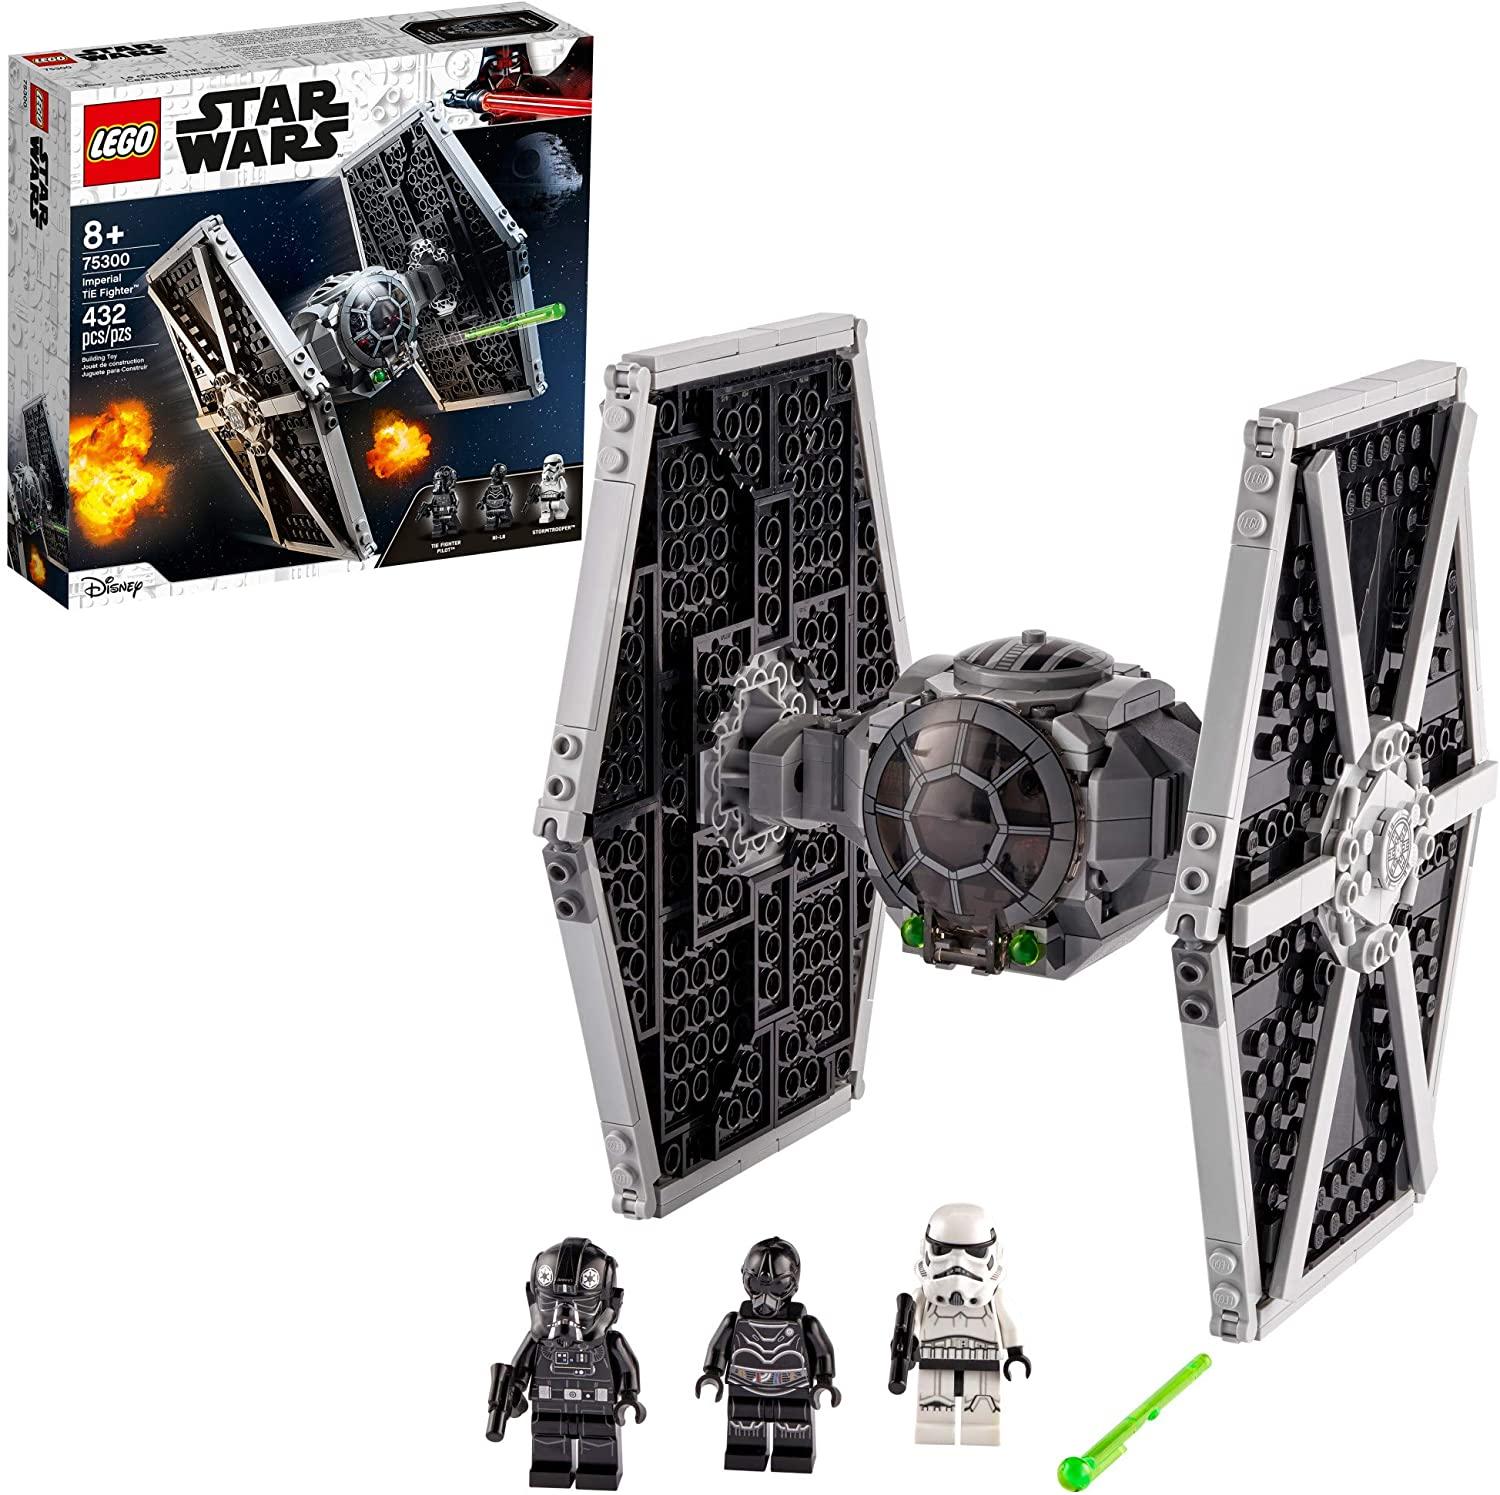 432-Piece LEGO Star Wars Imperial TIE Fighter Building Kit for $31.99 Shipped